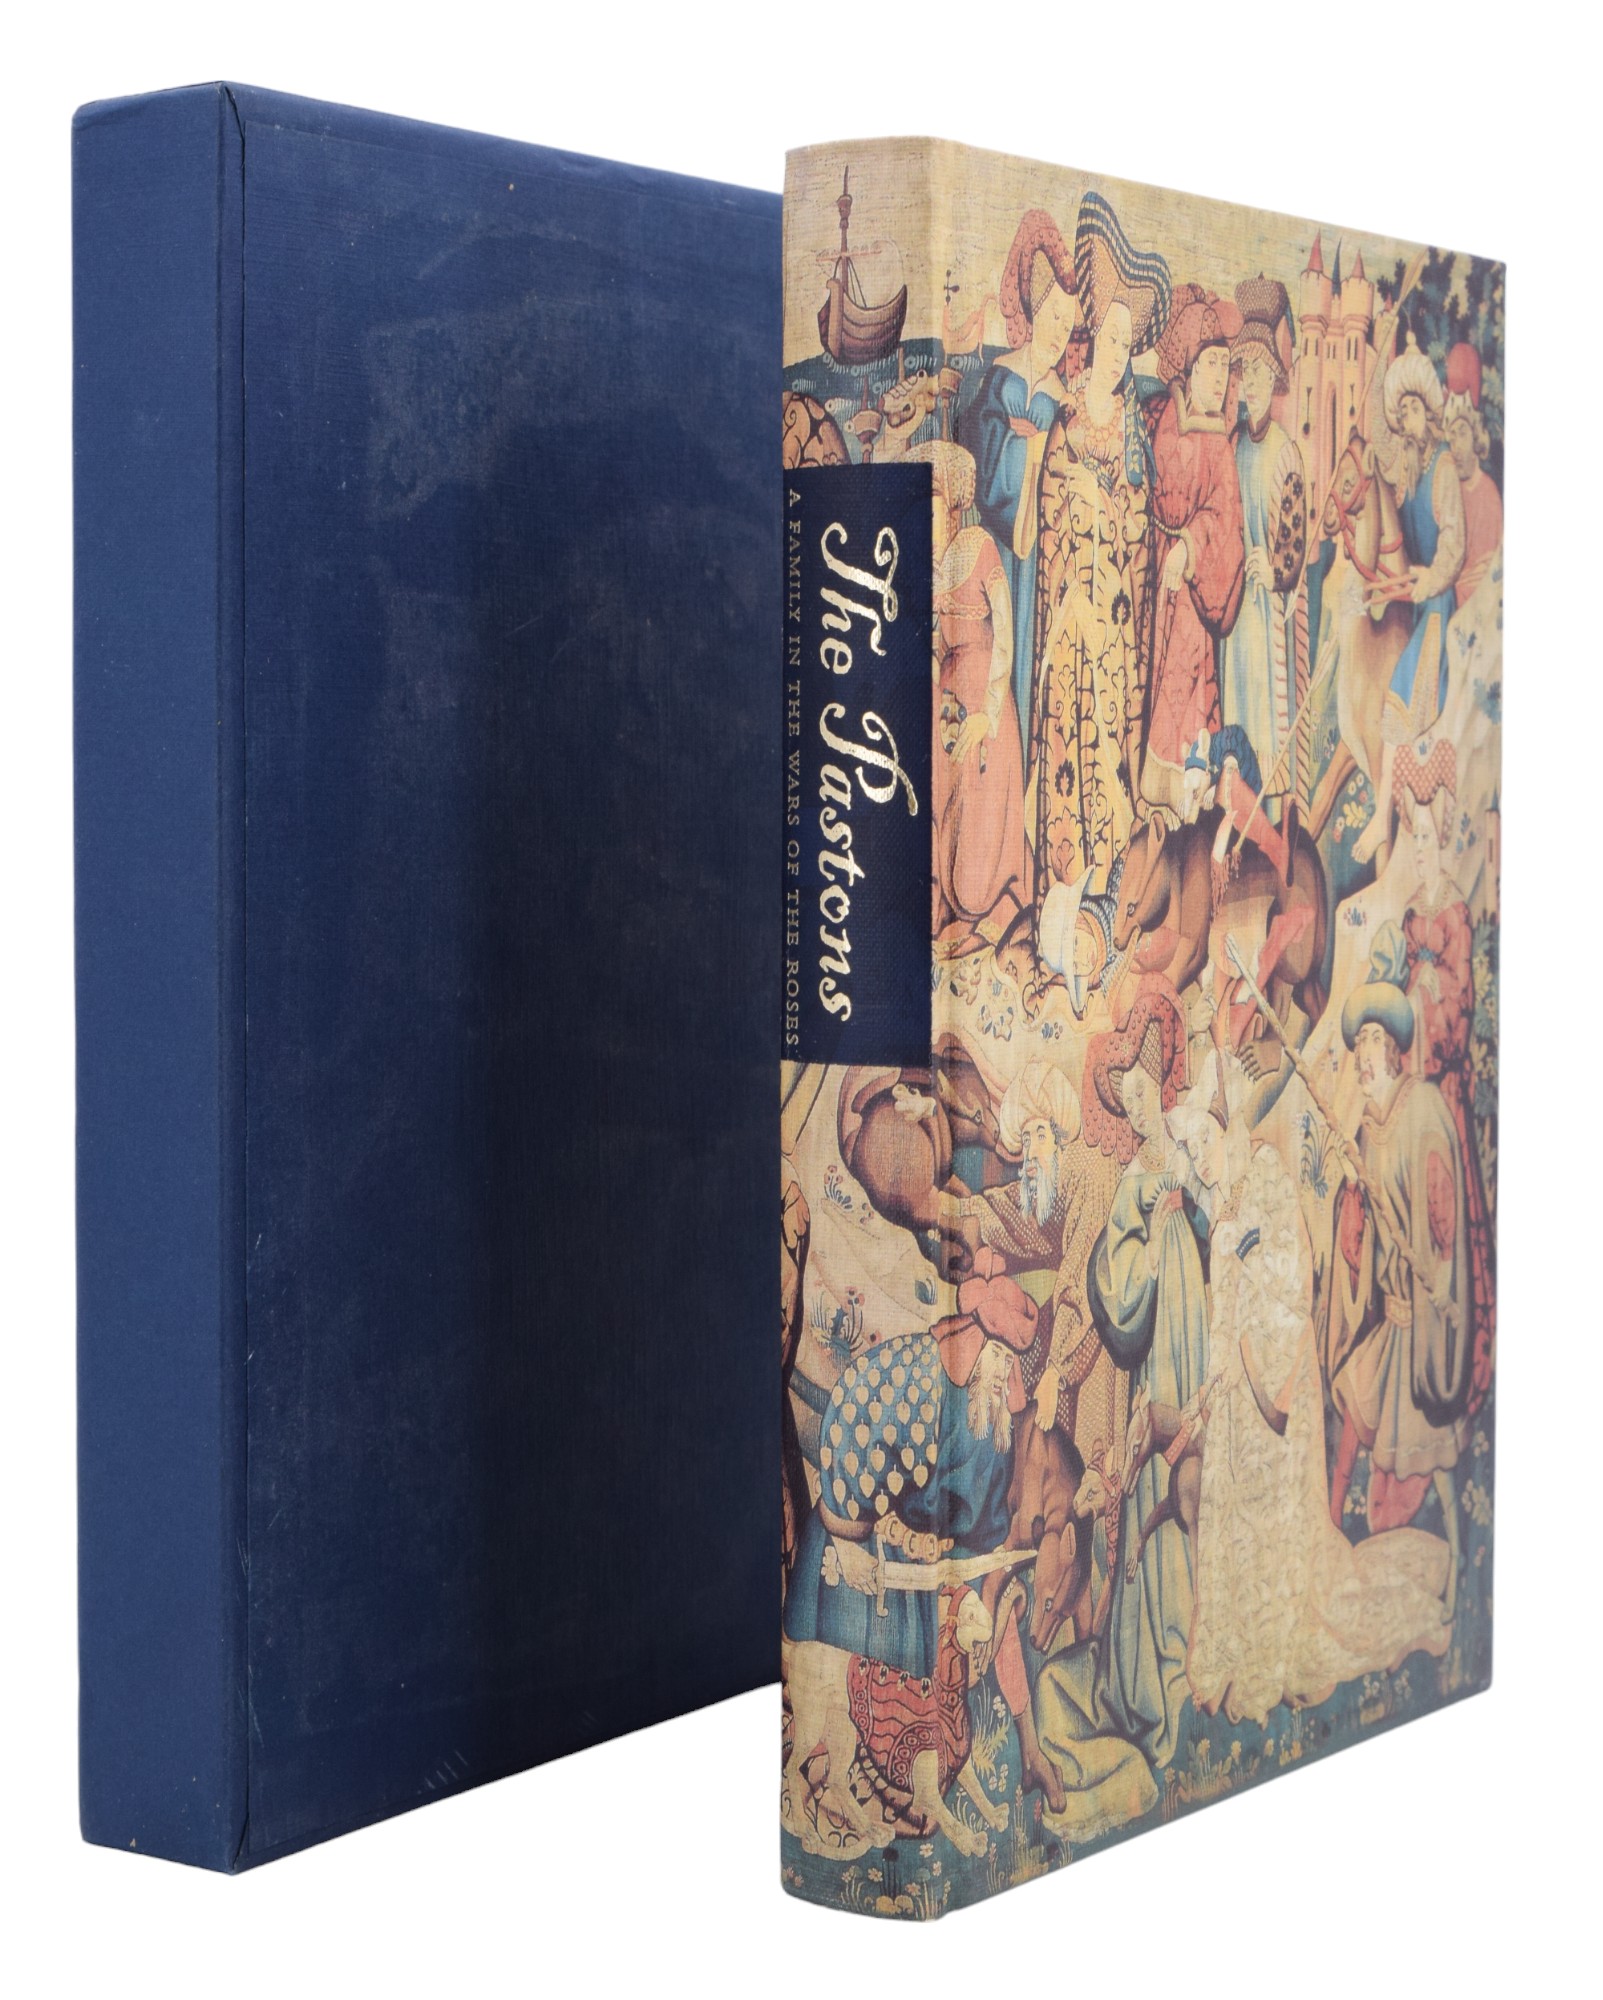 Seven Folio Society publications in slip cases, including Frances Wood, "The Silk Road", 2002; - Image 18 of 31